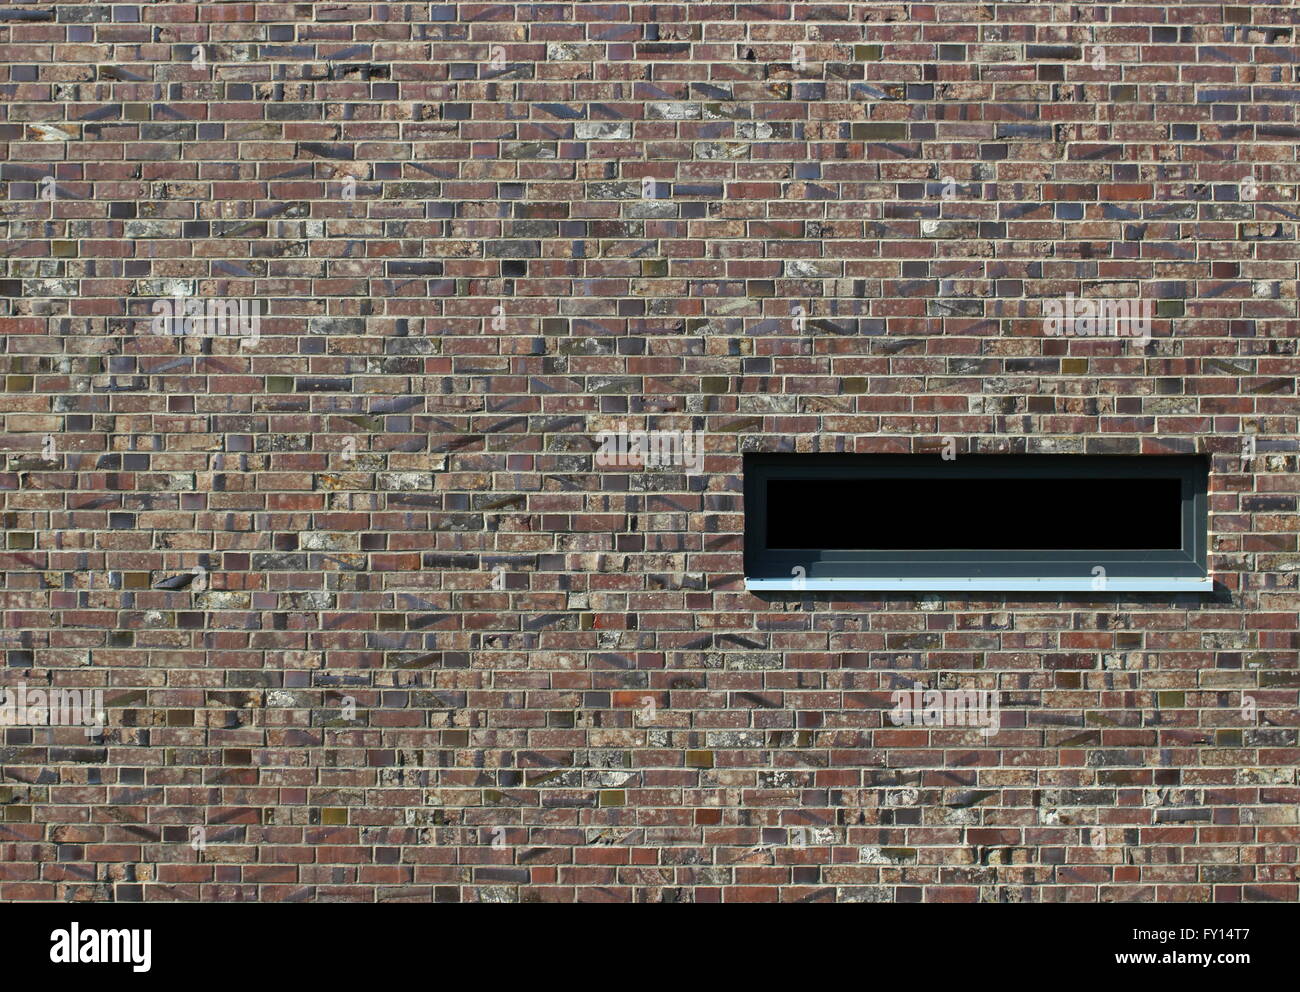 Brick texture with different colors and styles and a window. Stock Photo